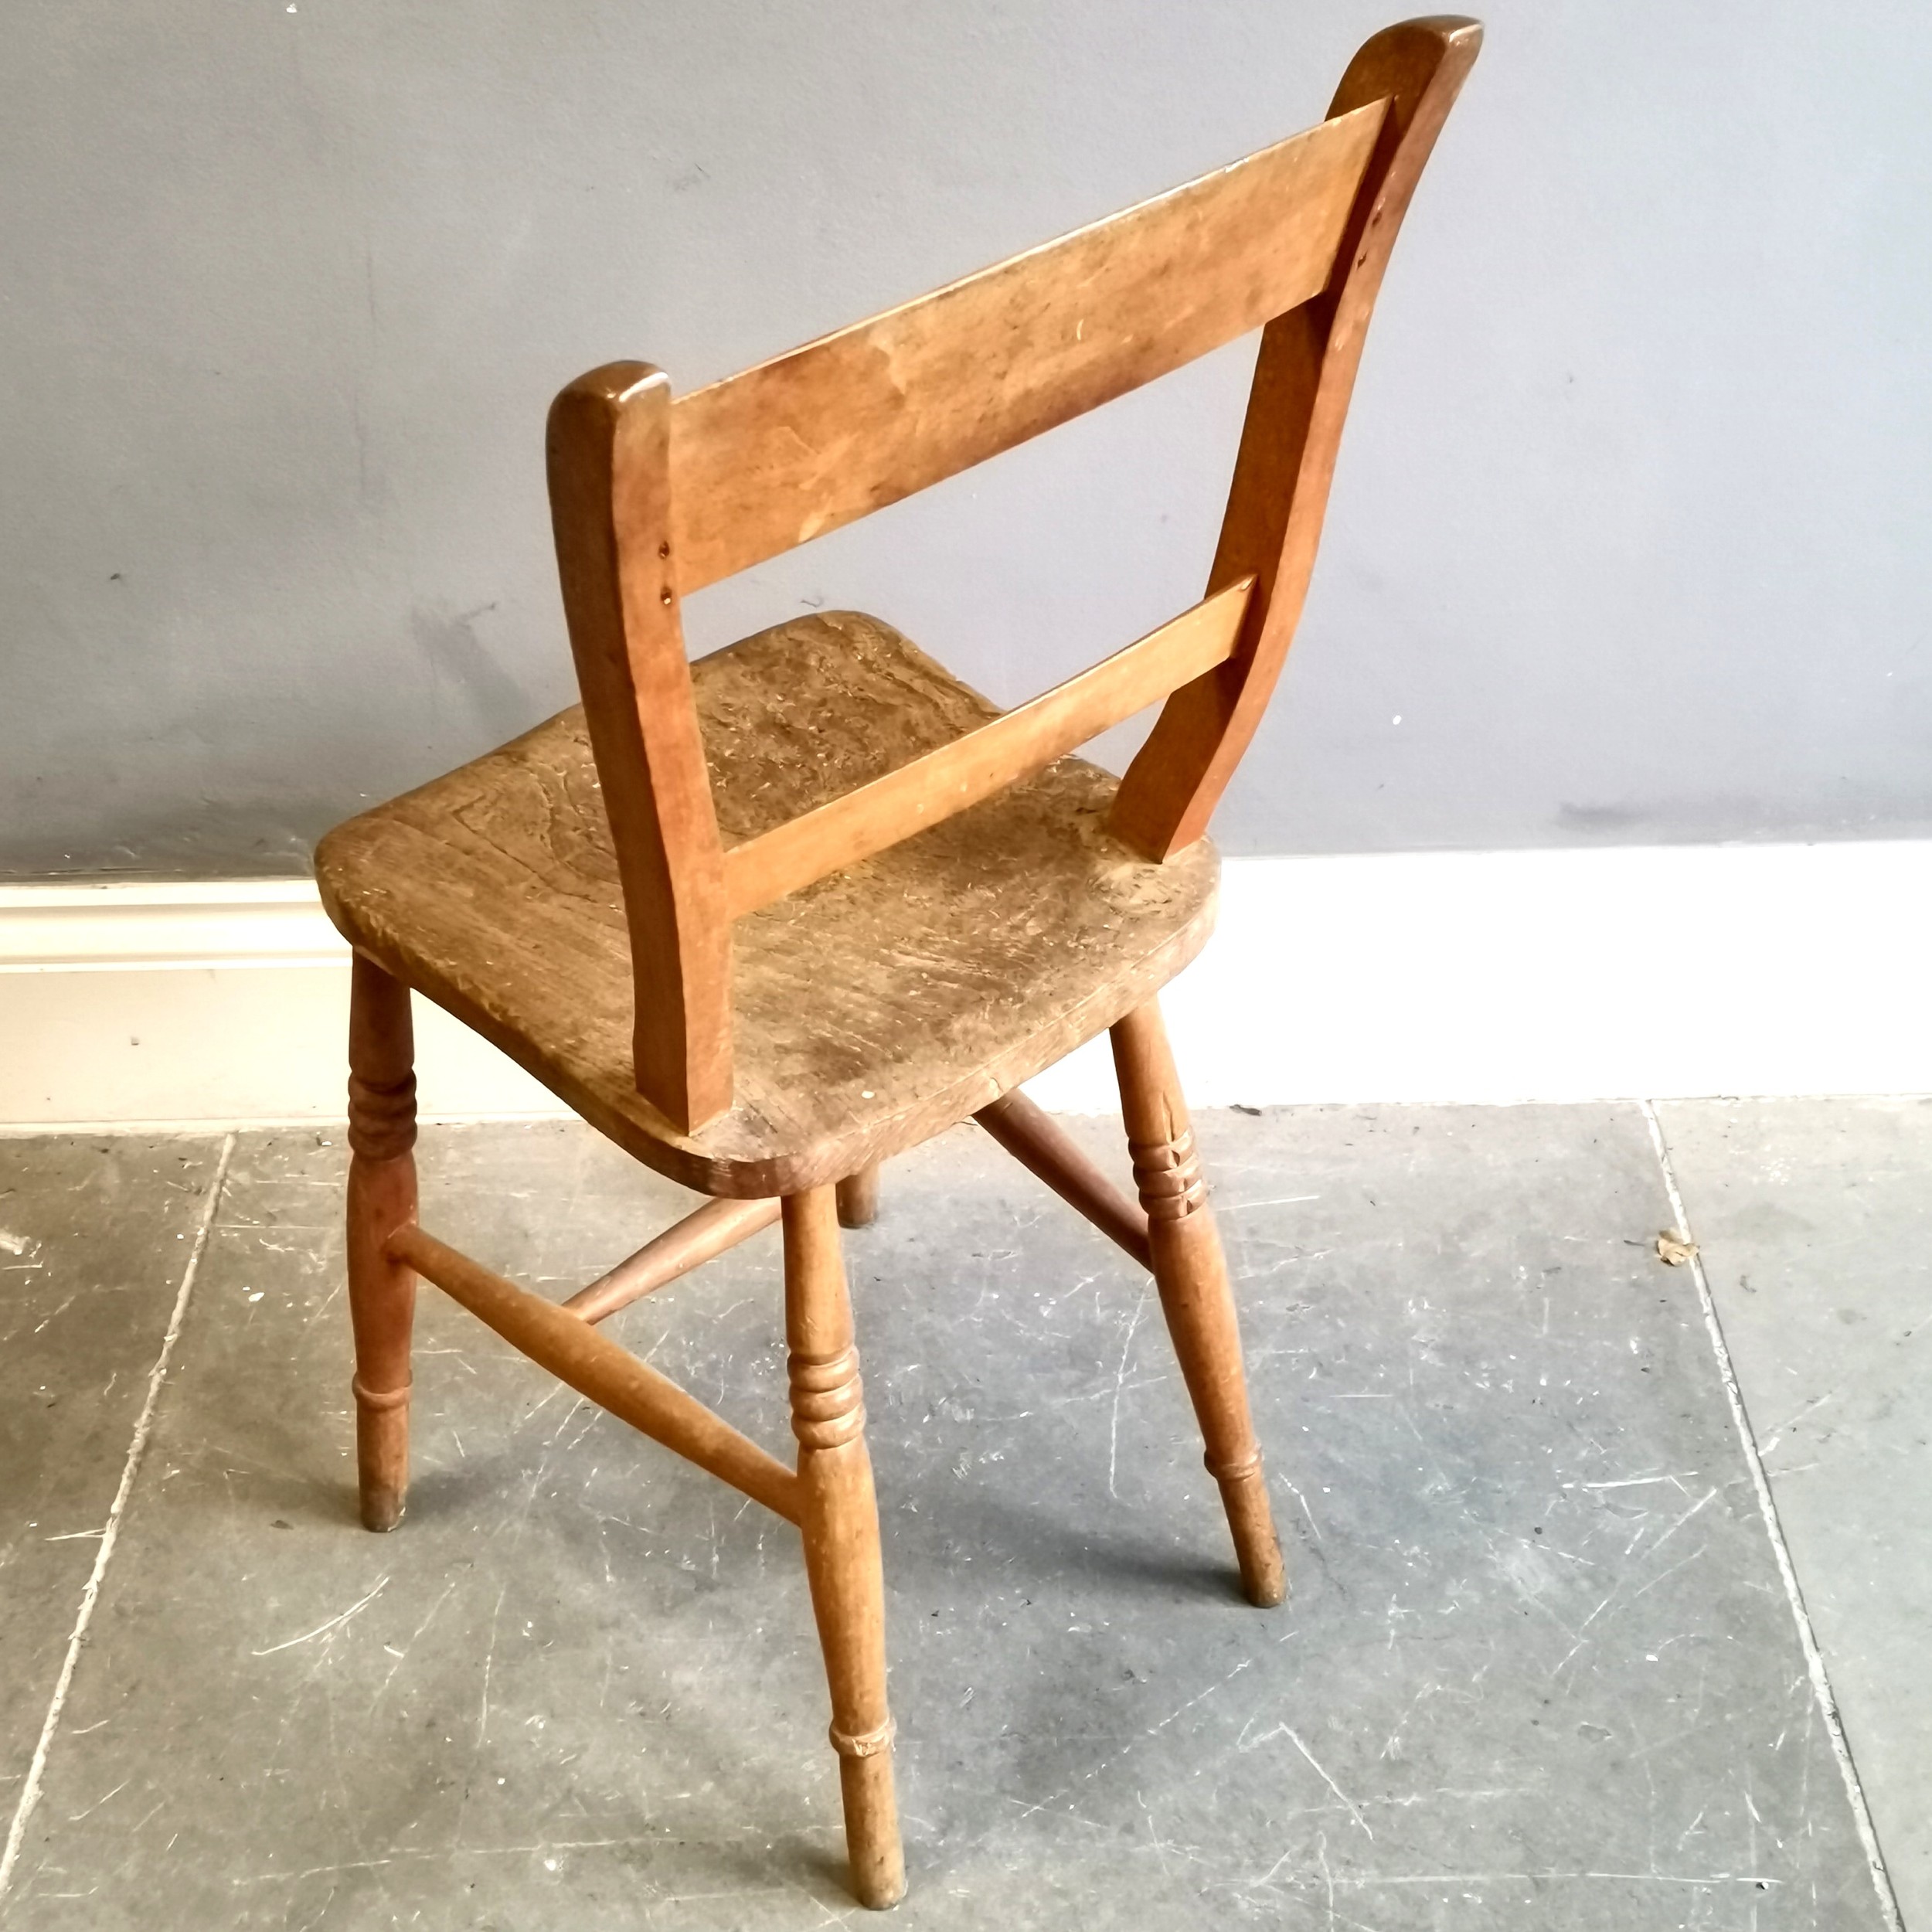 Antique Elm country kitchen dining chair, 34cm wide x 36cm deep x 82cm high, in used condition, - Image 2 of 2